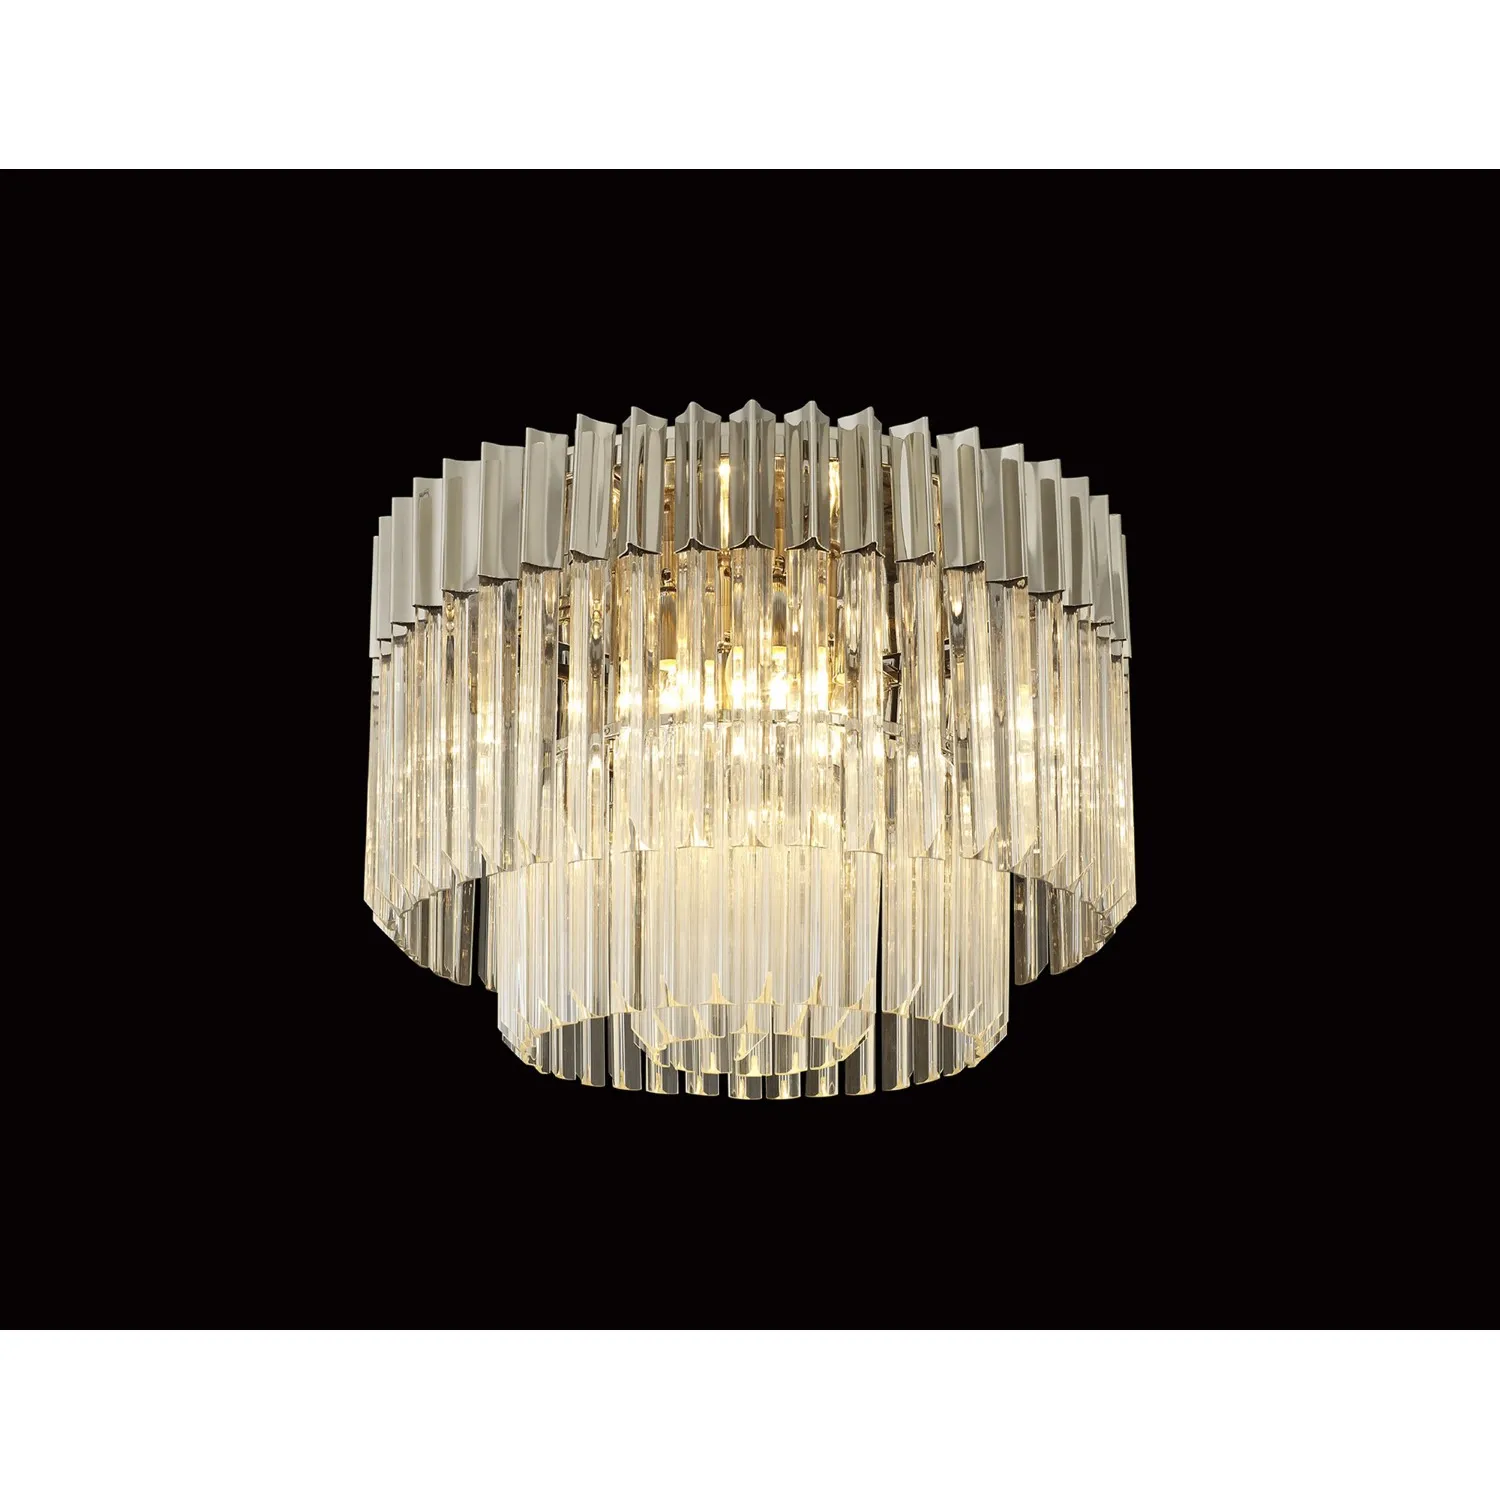 Polished Nickel Clear Sculpted Glass Ceiling Pendant Light